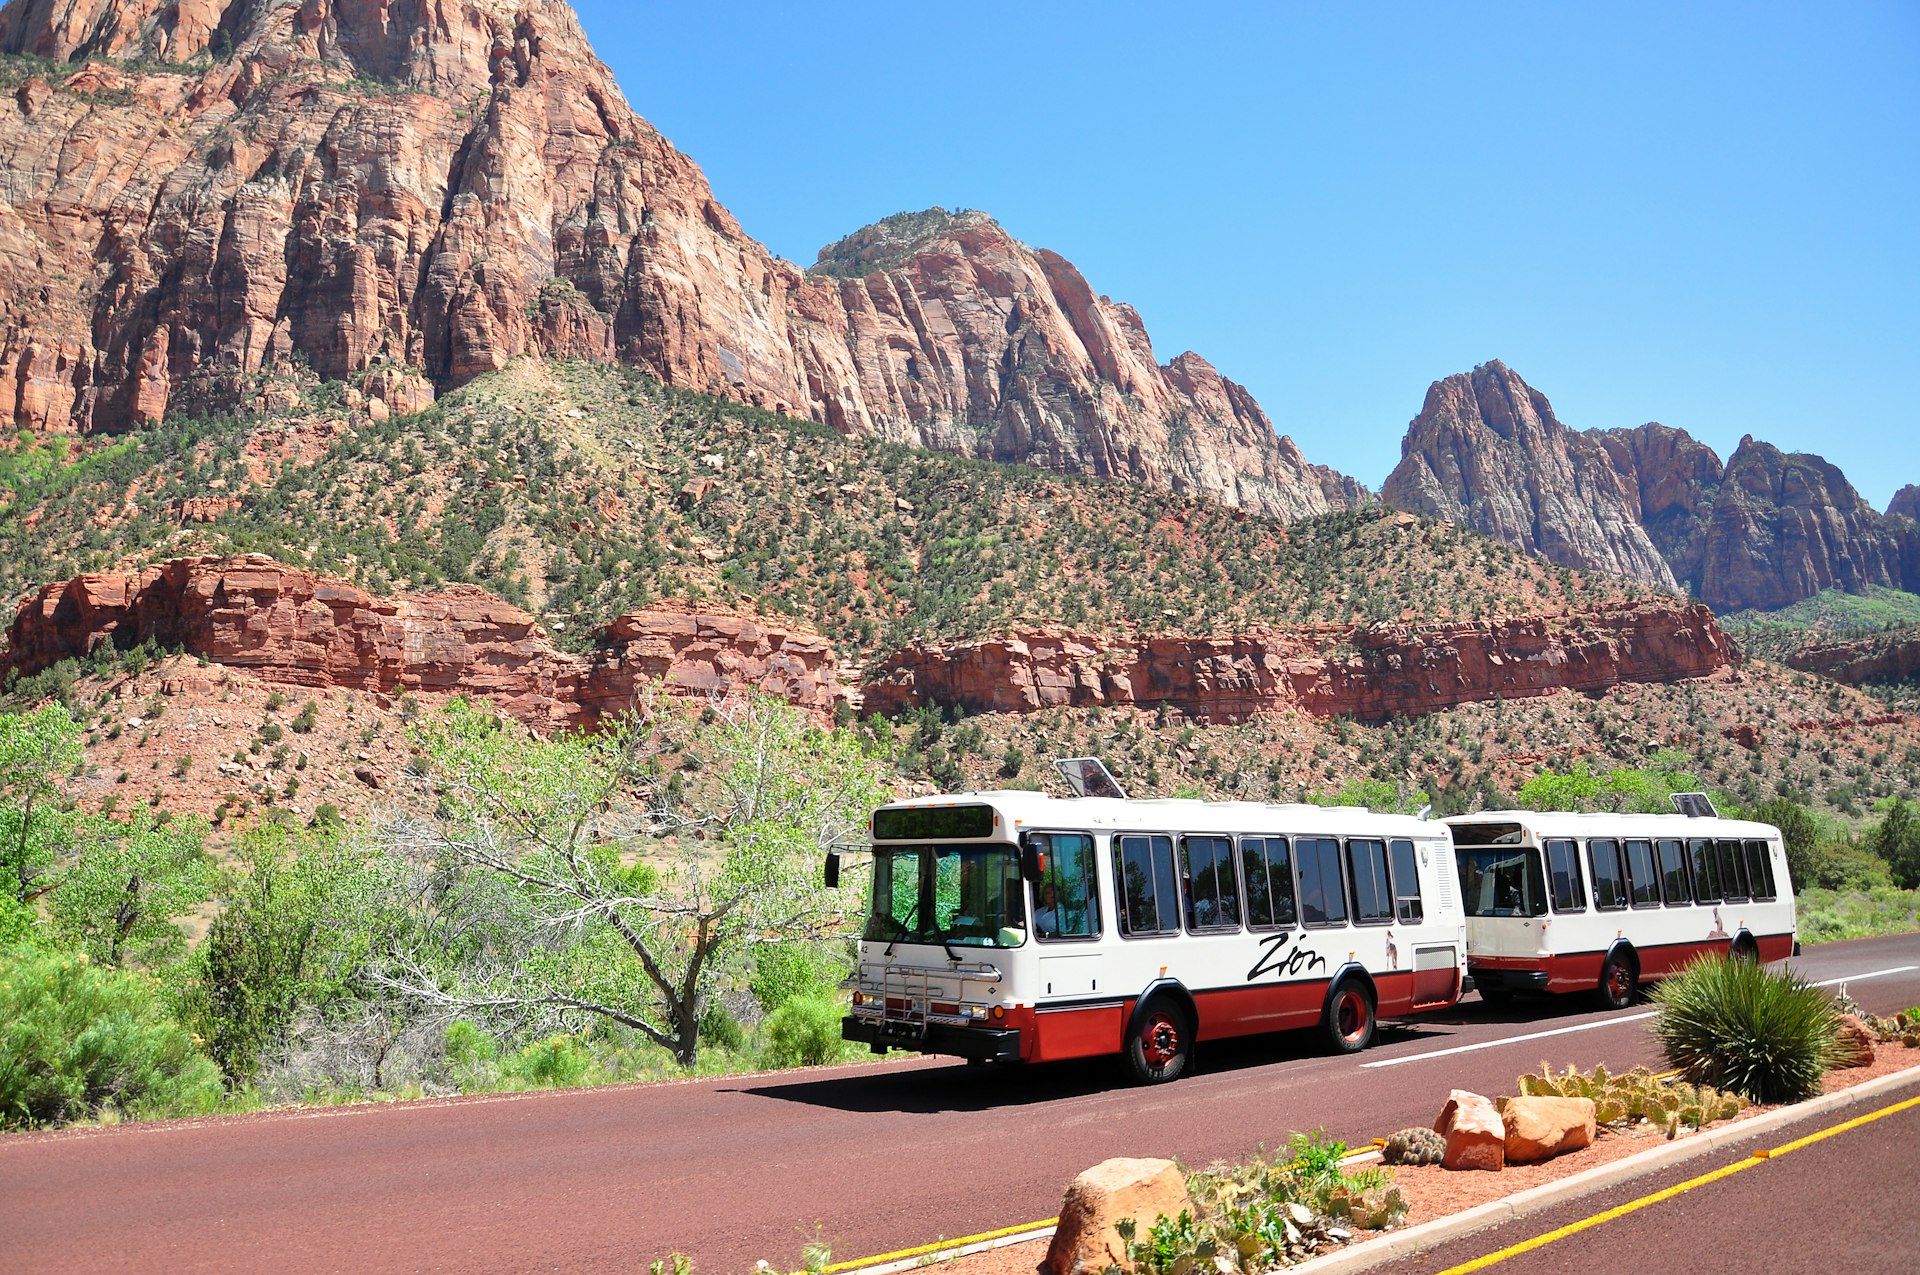 A bus with two separate compartments drive on a road through a red-rock canyon